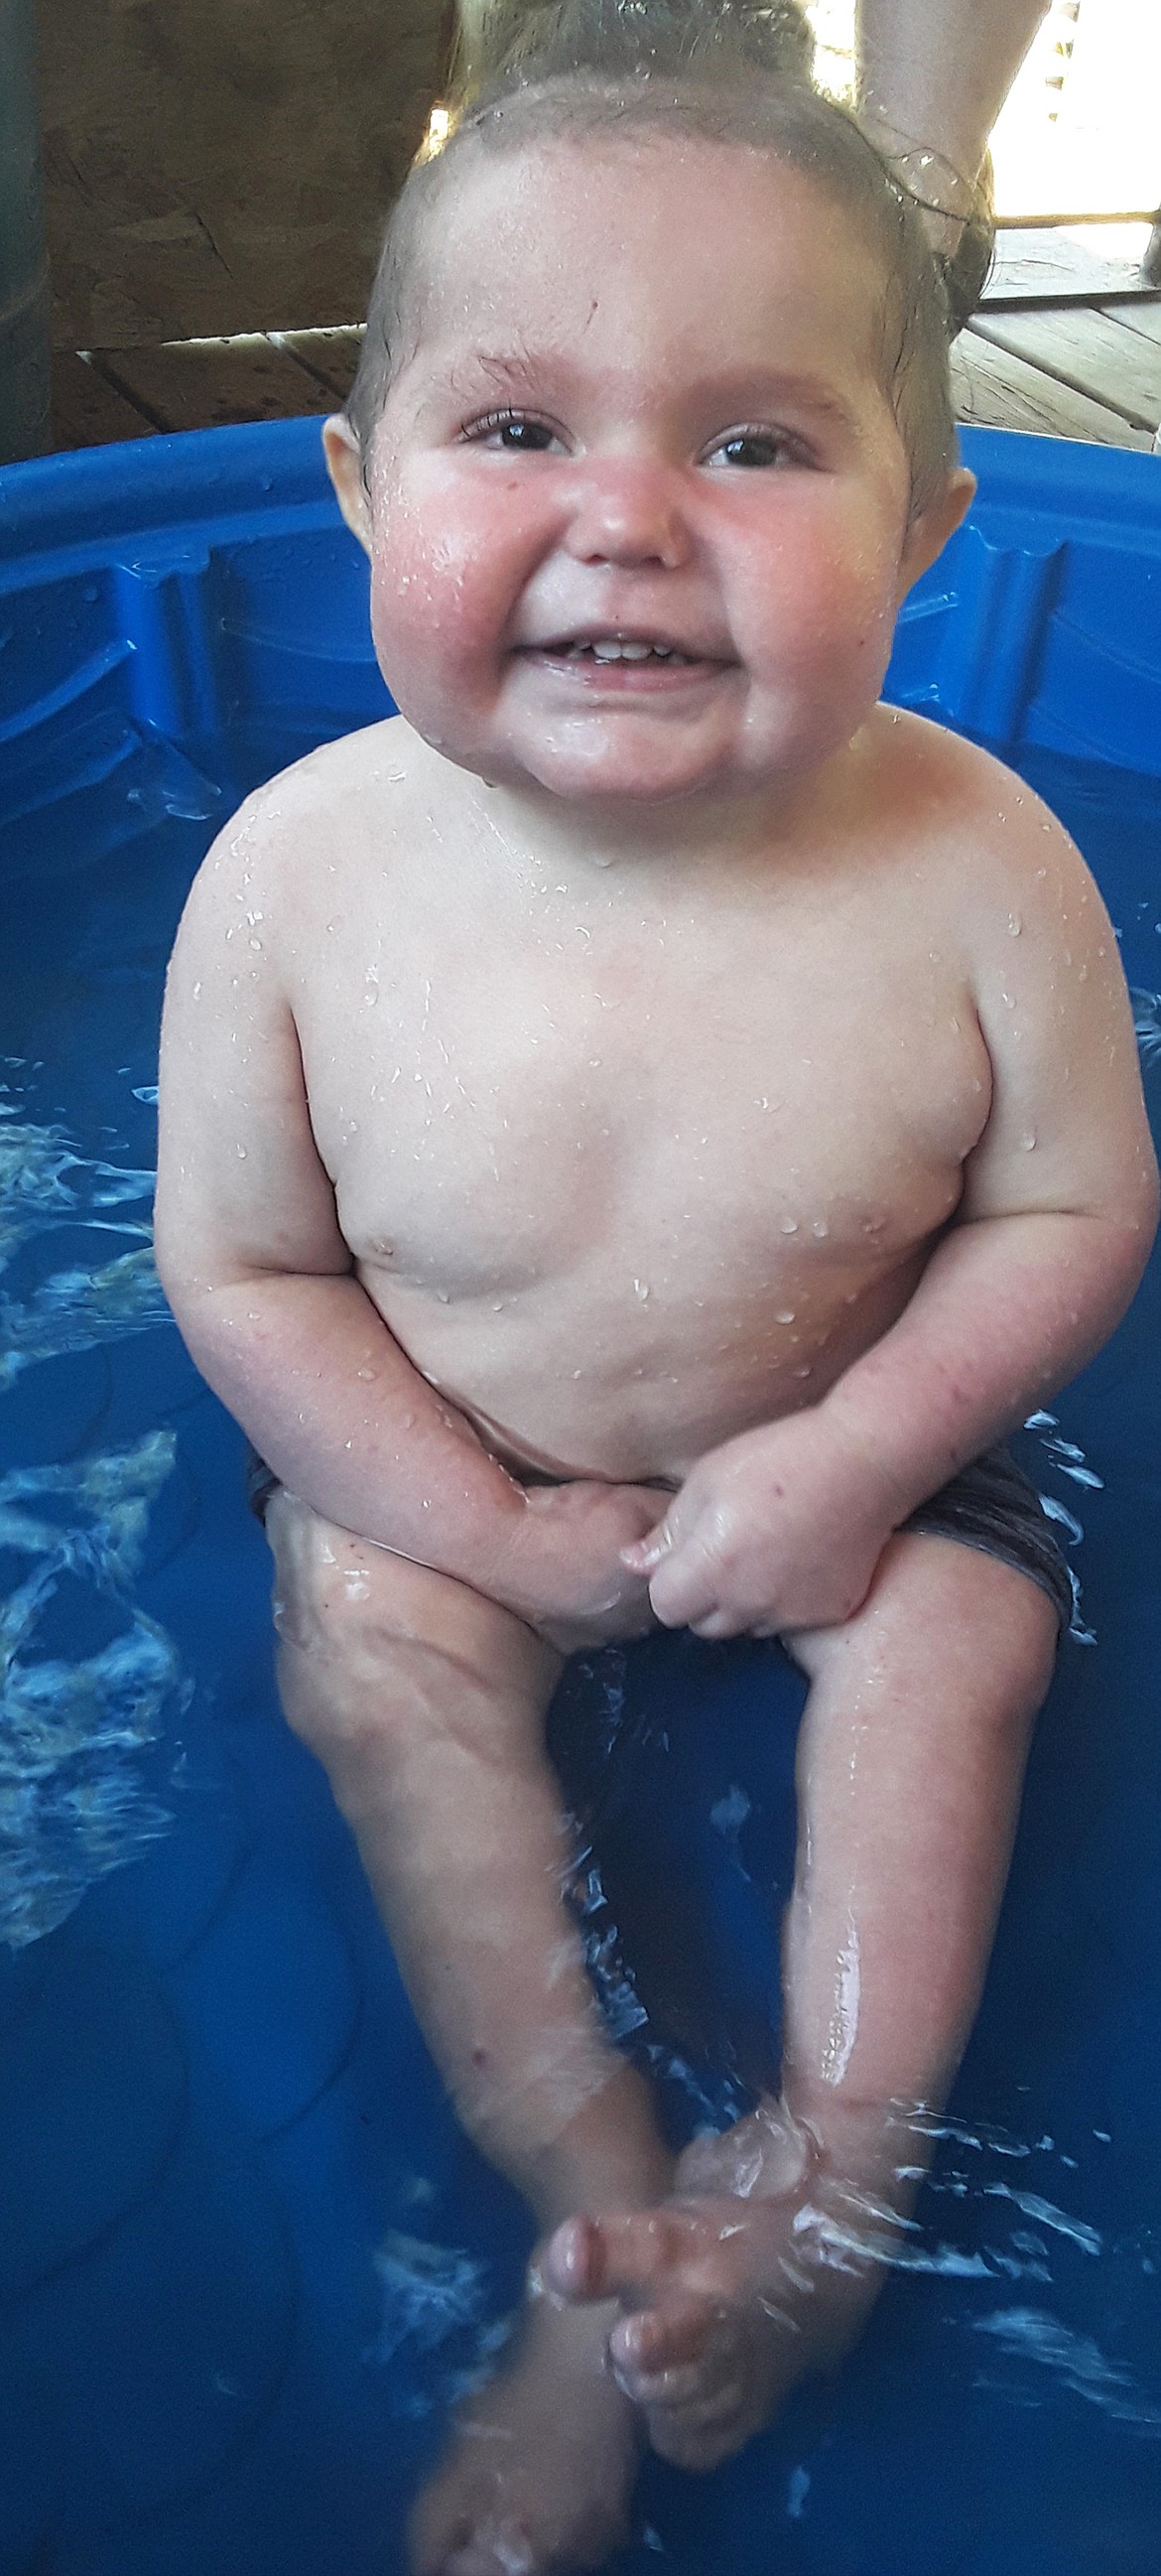 Rayden Darby enjoys his first trip to a pool.